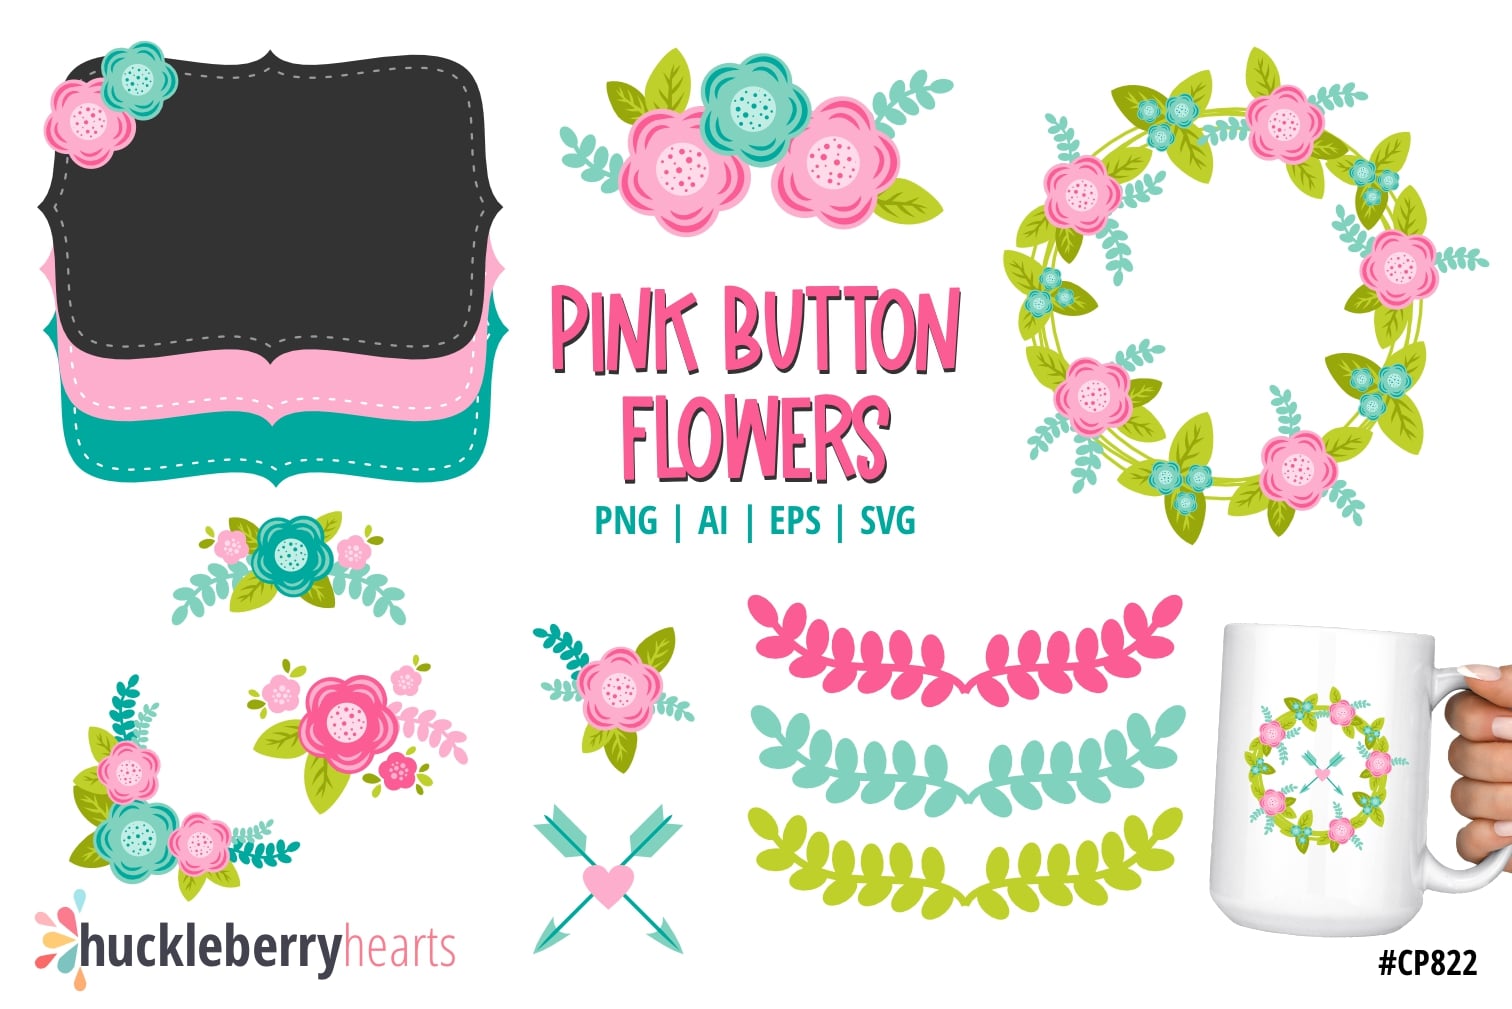 Pink Button Flowers